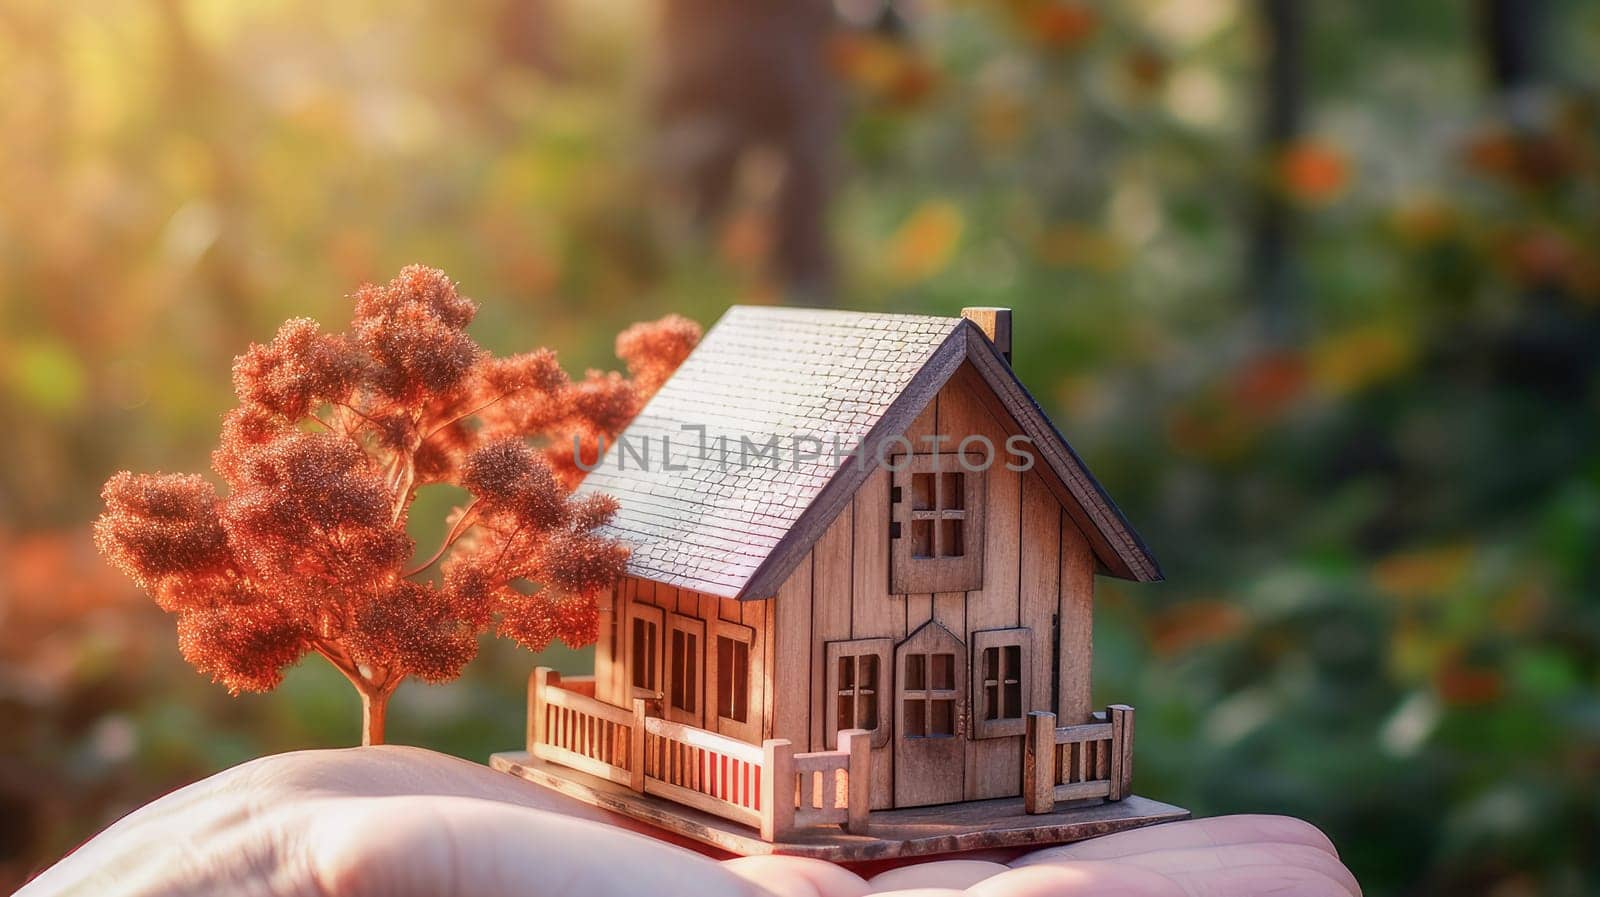 Hands hold a small wooden house against the backdrop of a green forest. Symbol of construction, safety or sweet home concept. Moving to a new house, housewarming, housewarming in a new house, loan or leasing from a bank, real estate, commercial use